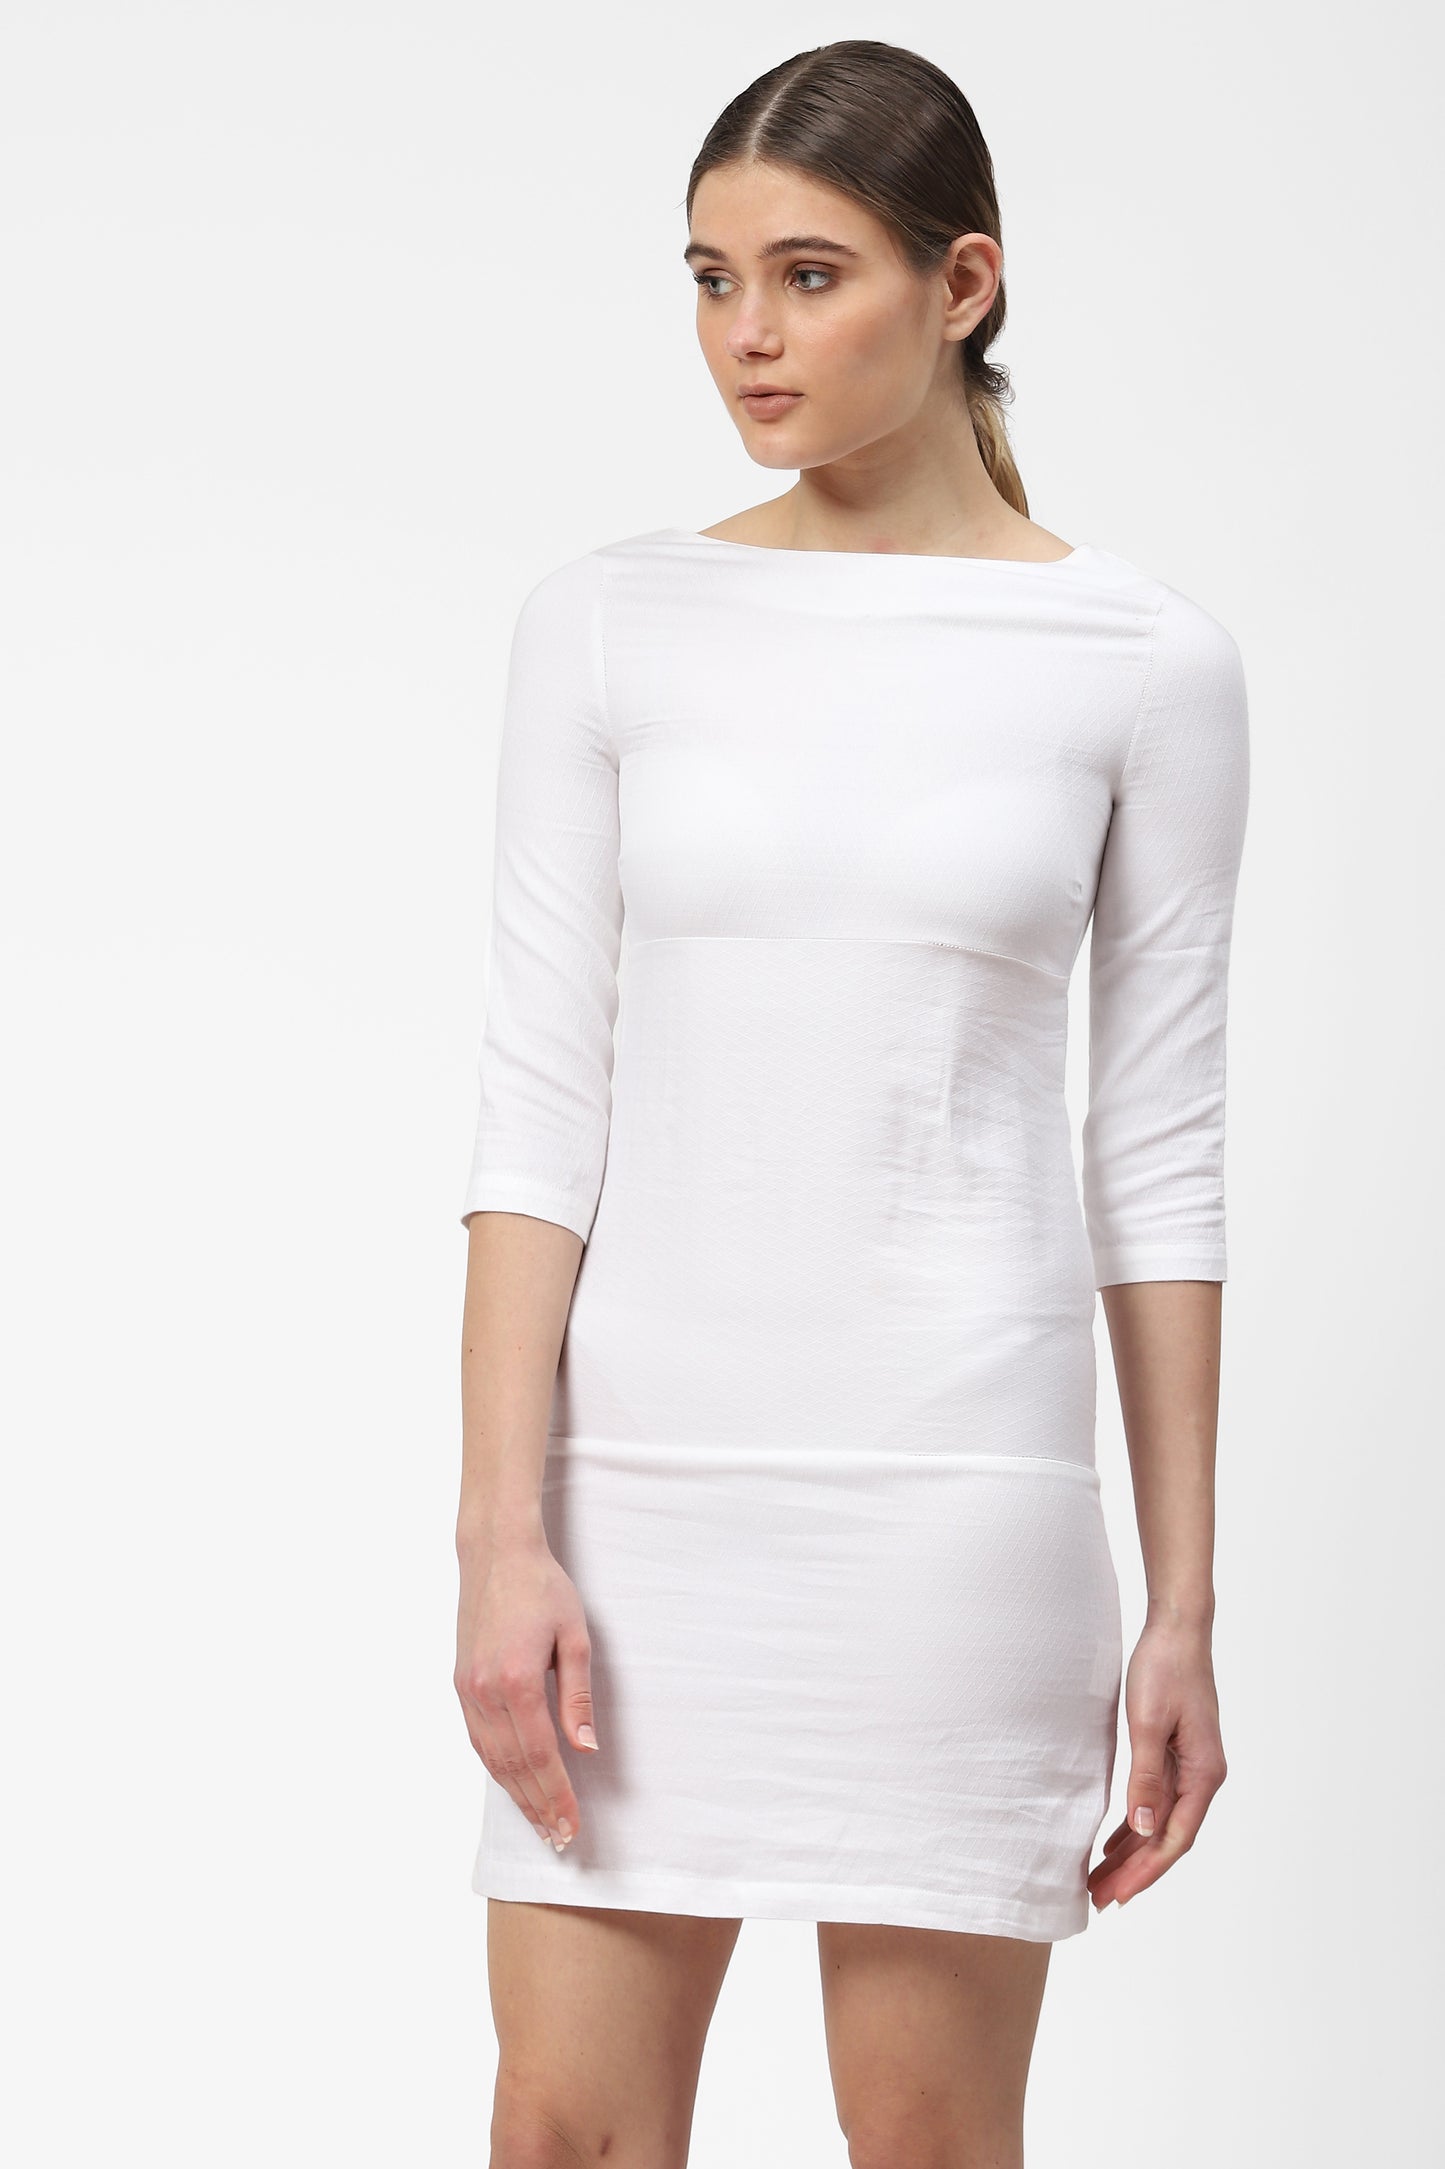 Classic White Cotton Dress With Full Sleeves